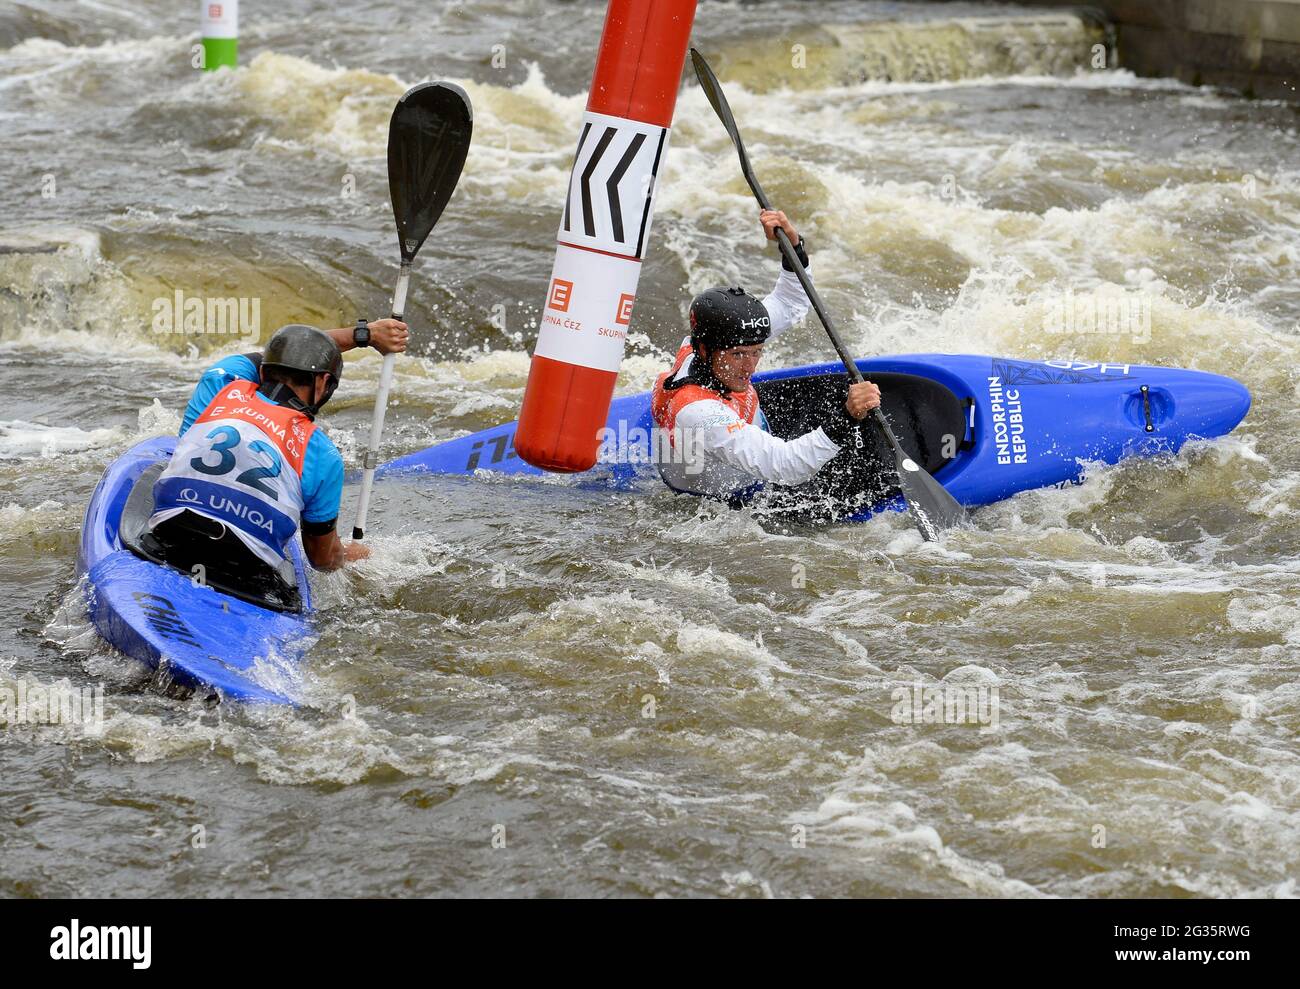 Extreme Canoe Slalom Final High Resolution Stock Photography and Images -  Alamy